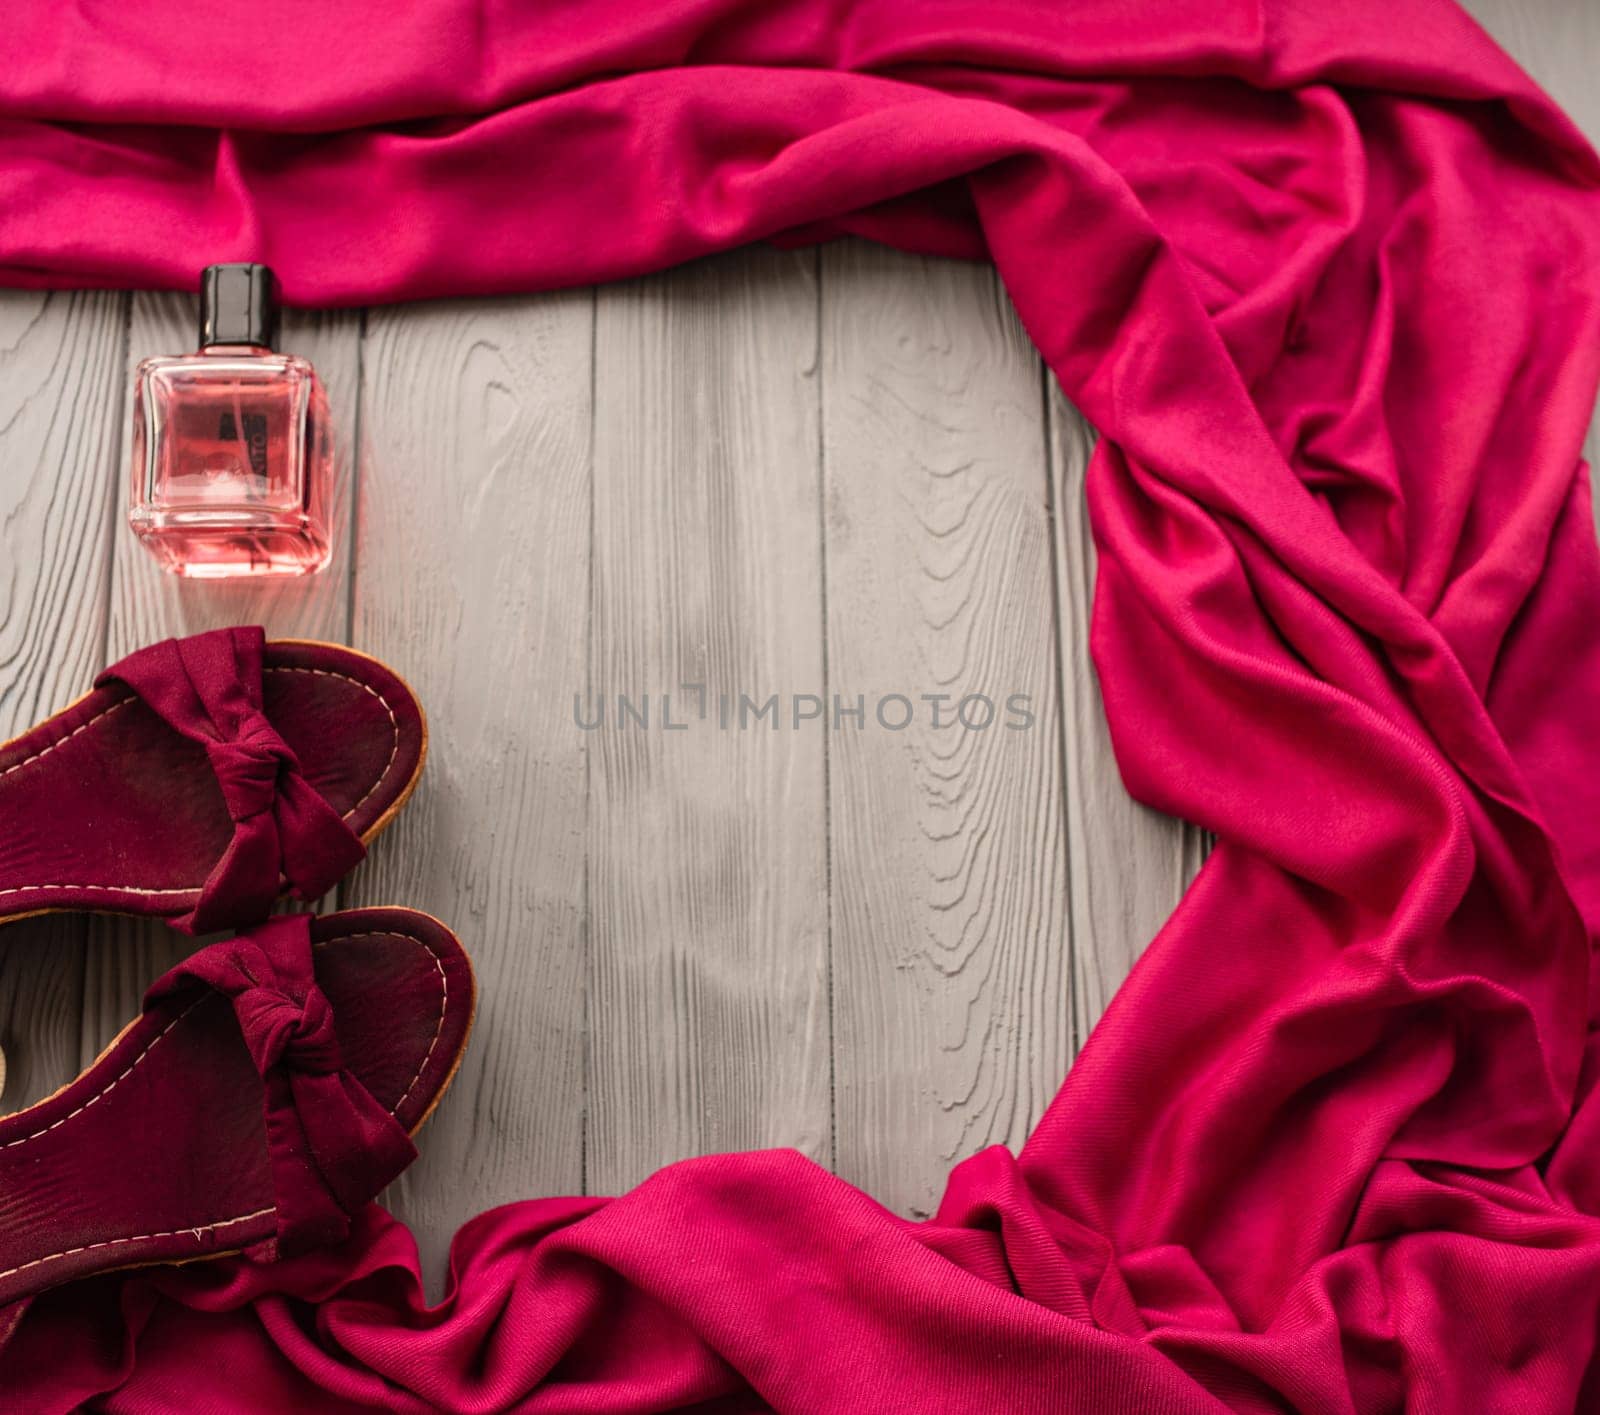 burgundy sandals wedge shawl shoes and bottle pink perfume. Summer background template mockup copy free space pattern colorful composition sample text. Top view above grey wooden background flat lay